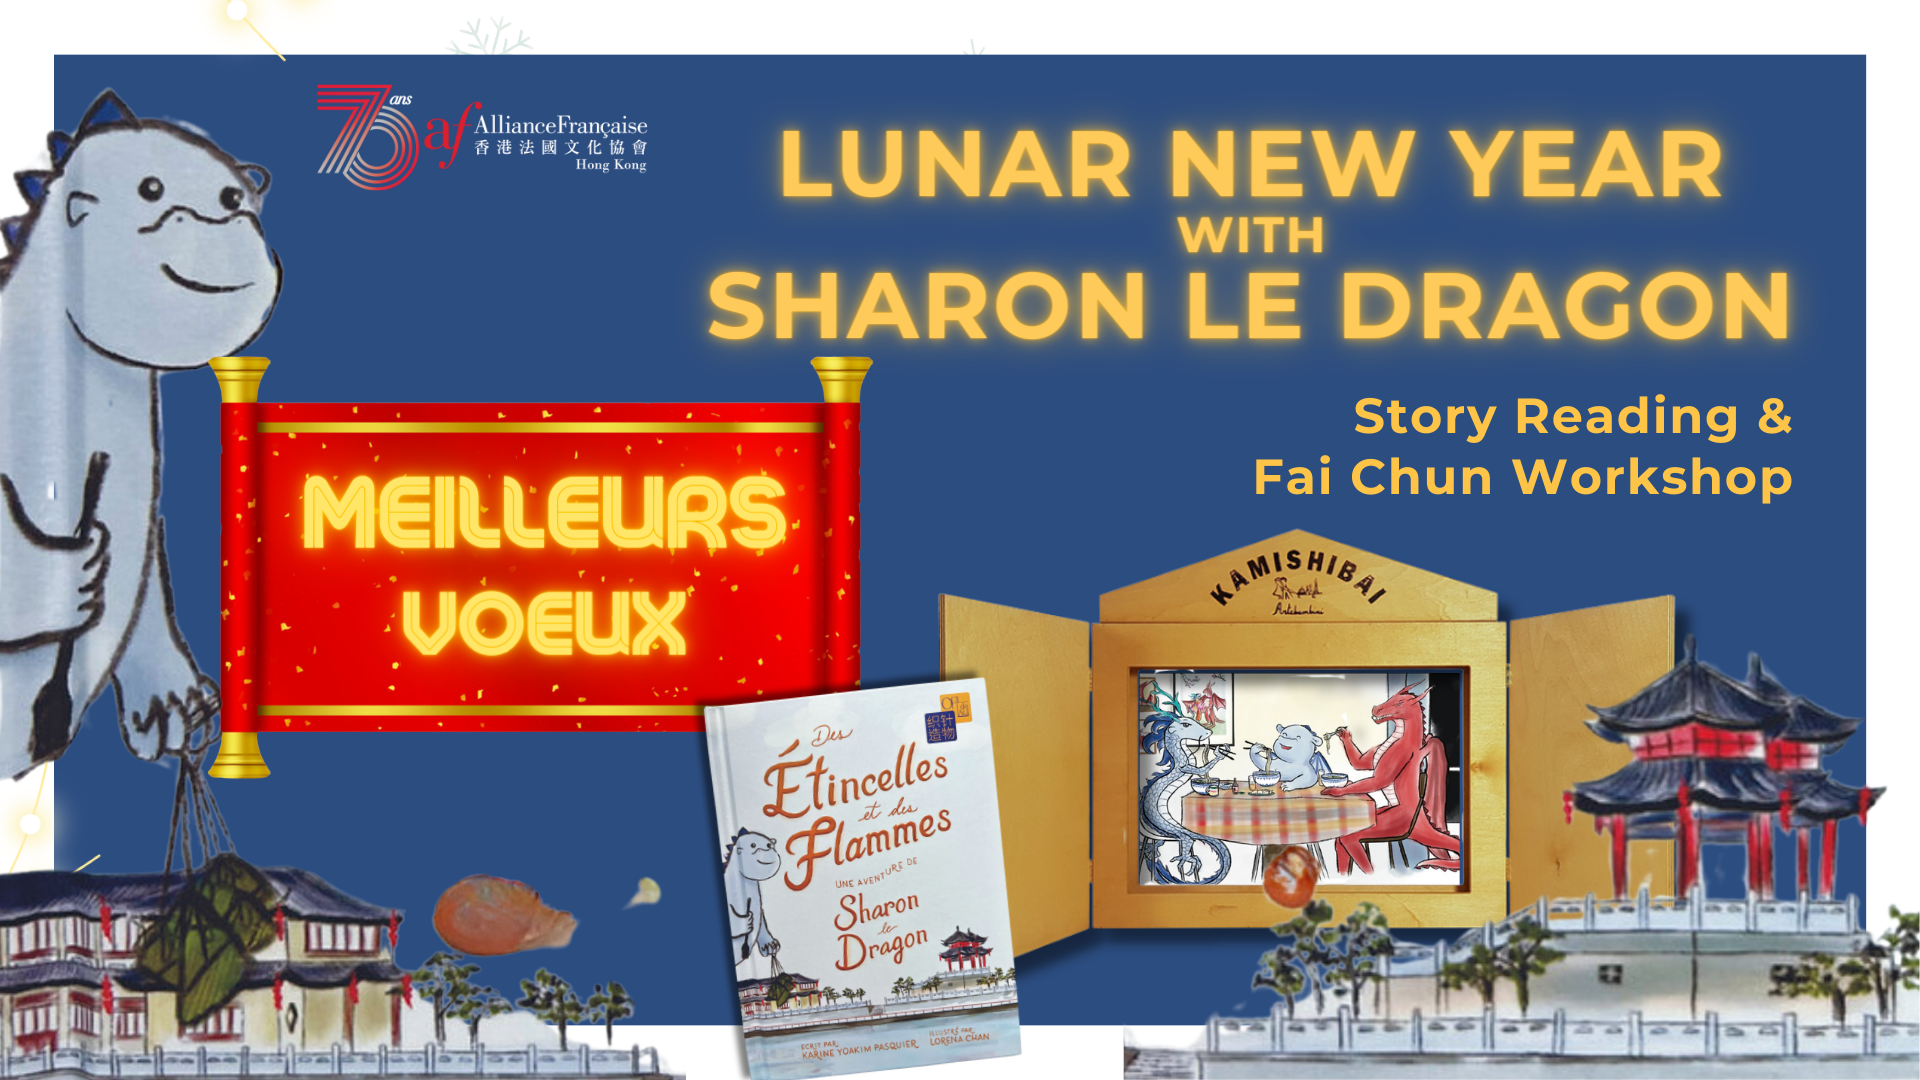 Celebrate Lunar New Year with Sharon le dragon